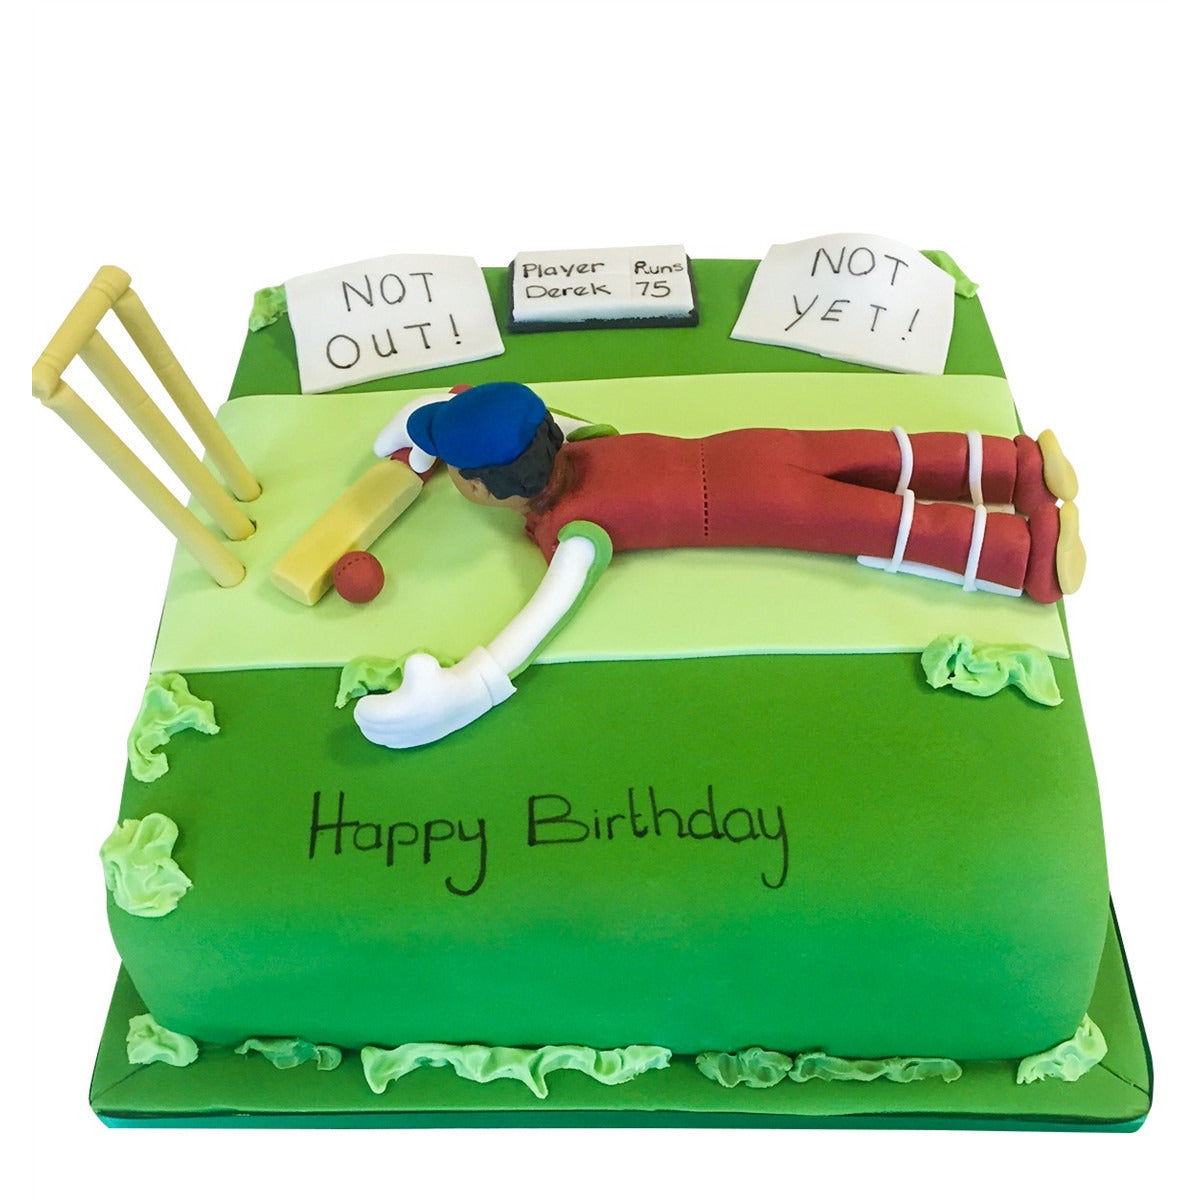 Bakeven - Enjoy the game and chase your dreams… Cricket Theme Cake  commissioned by a father for his son who plays cricket #bakeven  #chocolatecake #chocolatetrufflecake #egglessbaking #homebaker #homemade  #hyderabadbaker #hyderabadfoodie ...